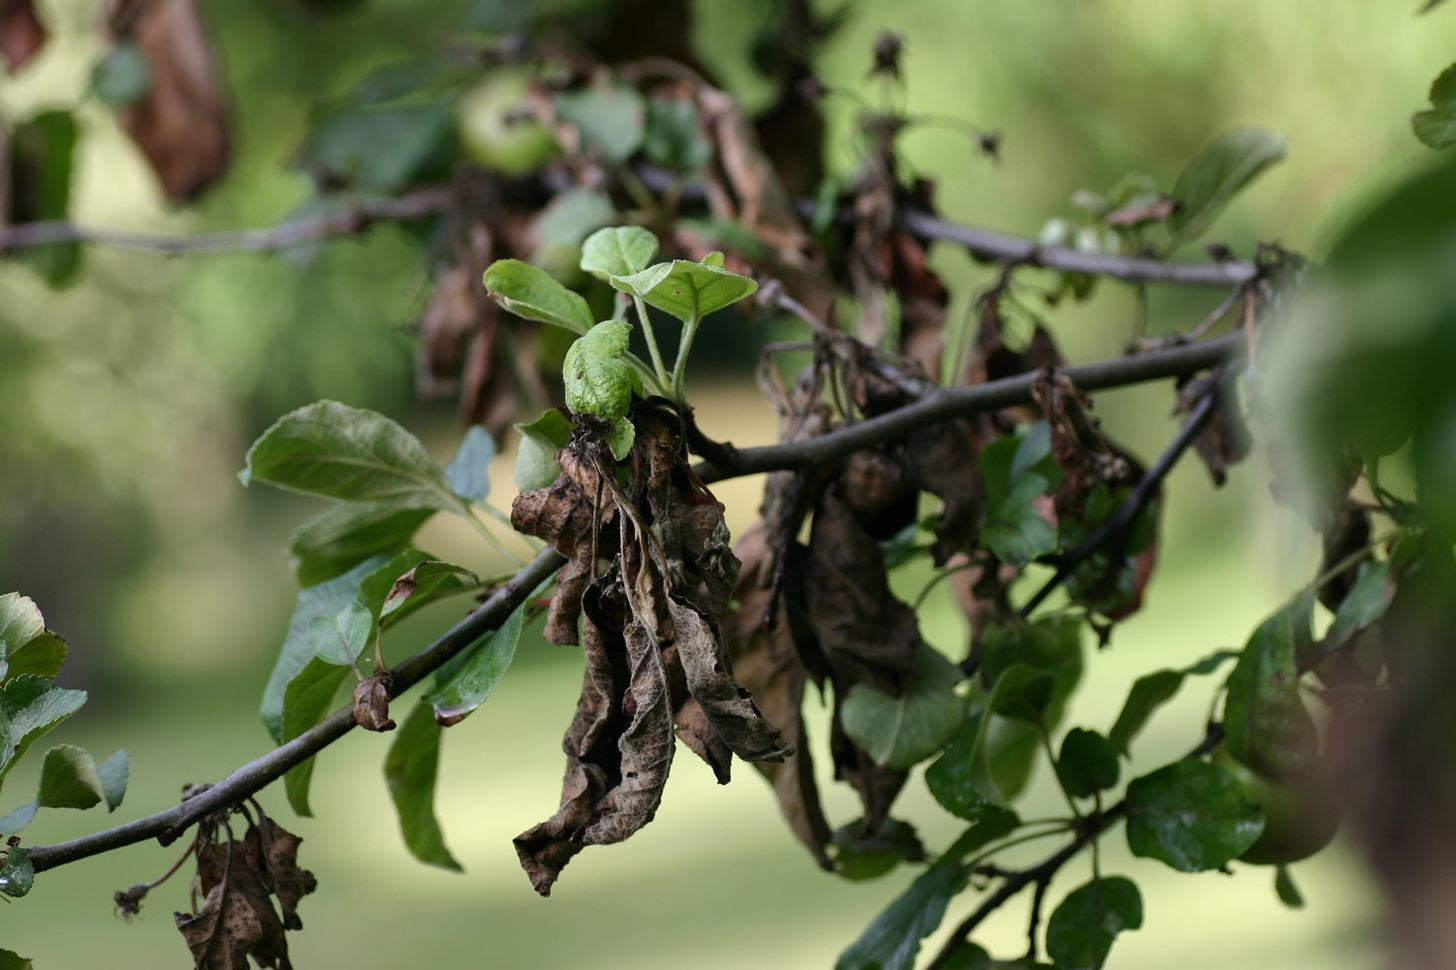 Like Peaches? Protective Virus Could Save Millions of Dollars in Fruit from Fire Blight